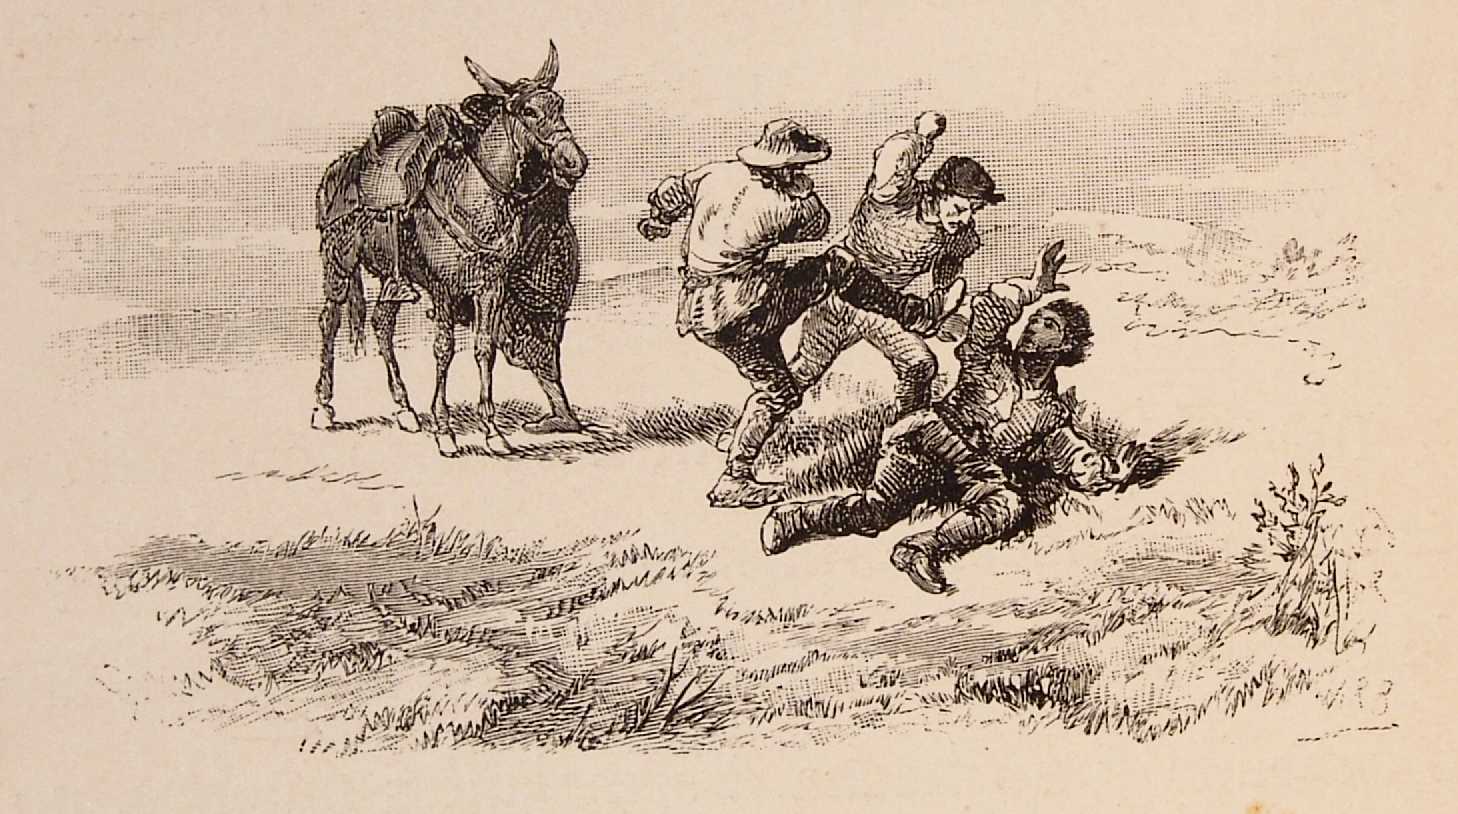 a drawing of three men on horses being chased by another man